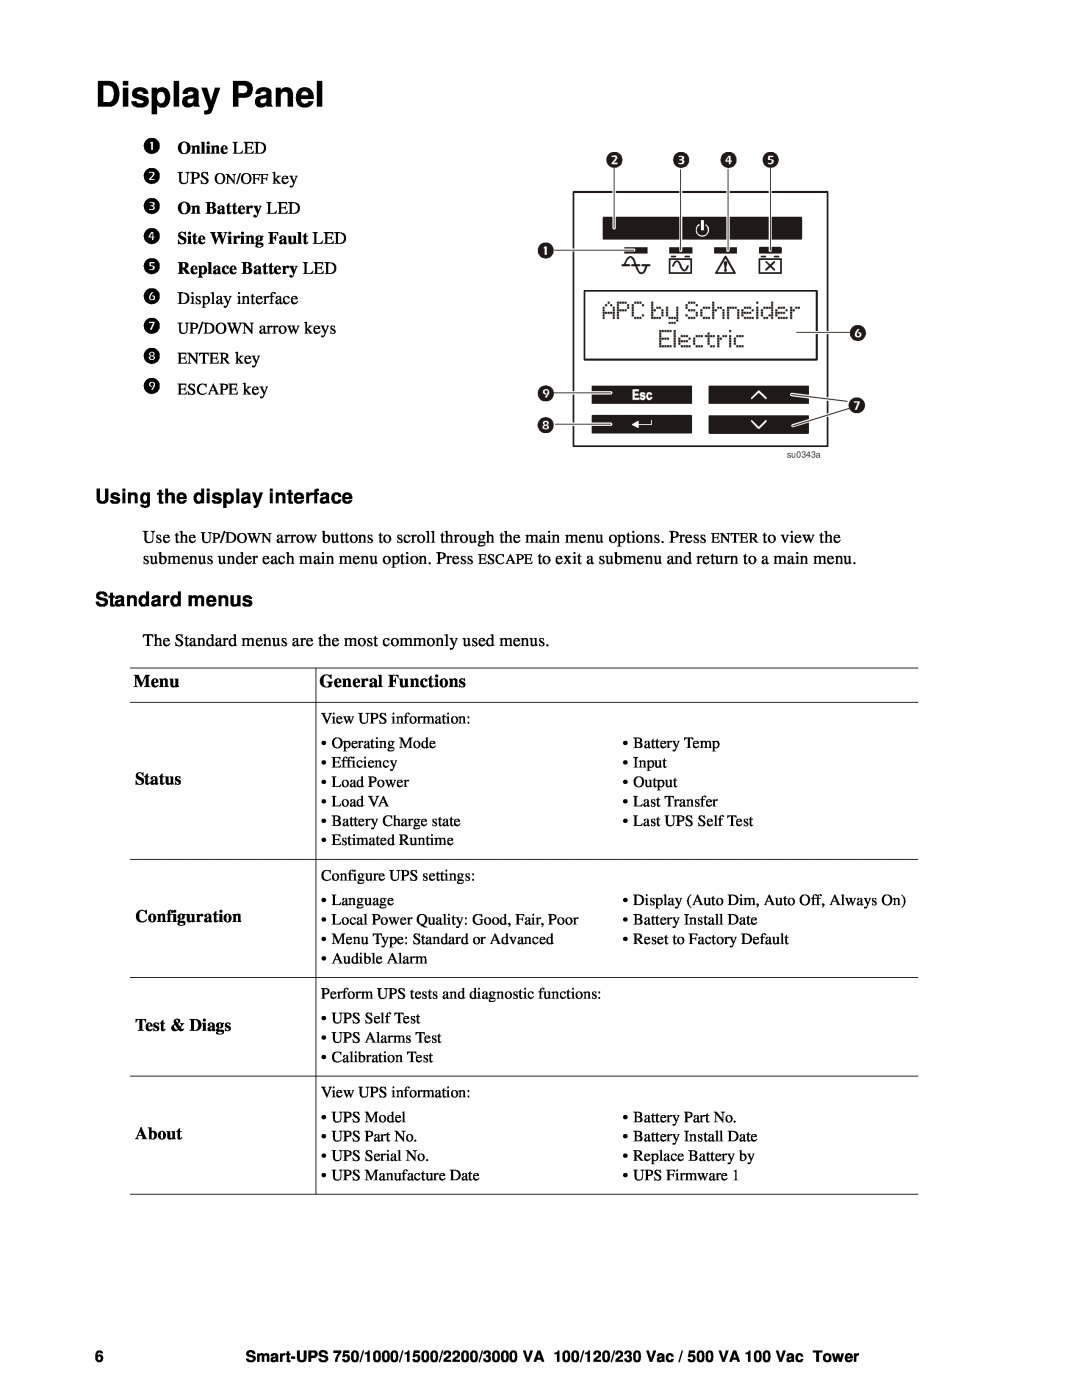 TRENDnet SMT1000 operation manual Display Panel, APC by Schneider, Electric, Using the display interface, Standard menus 